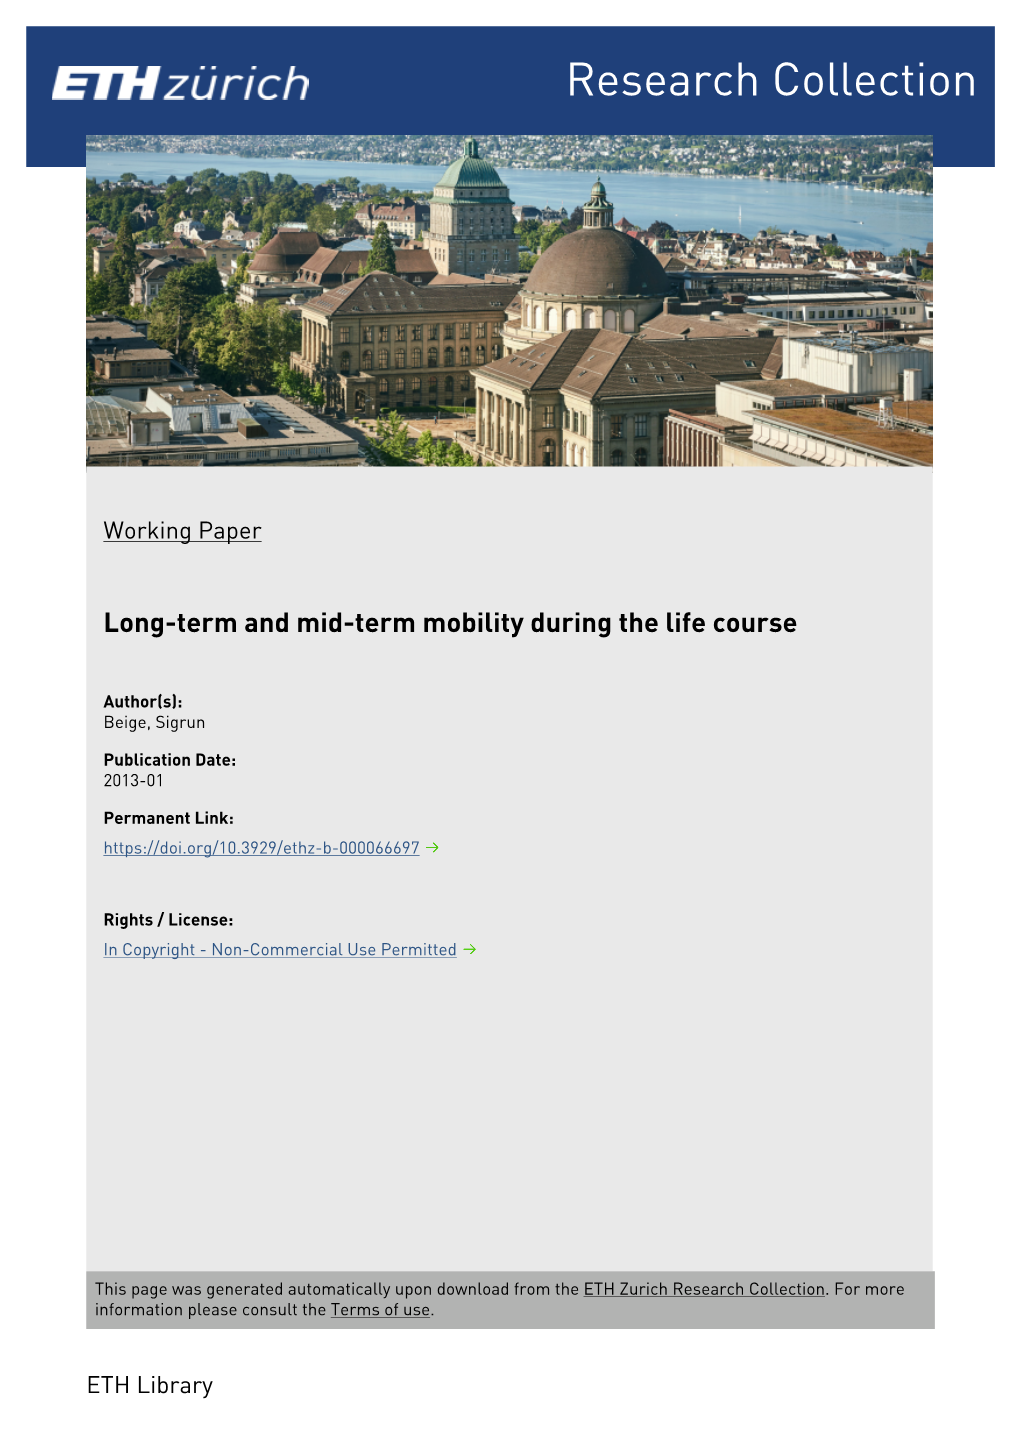 Long-Term and Mid-Term Mobility During the Life Course